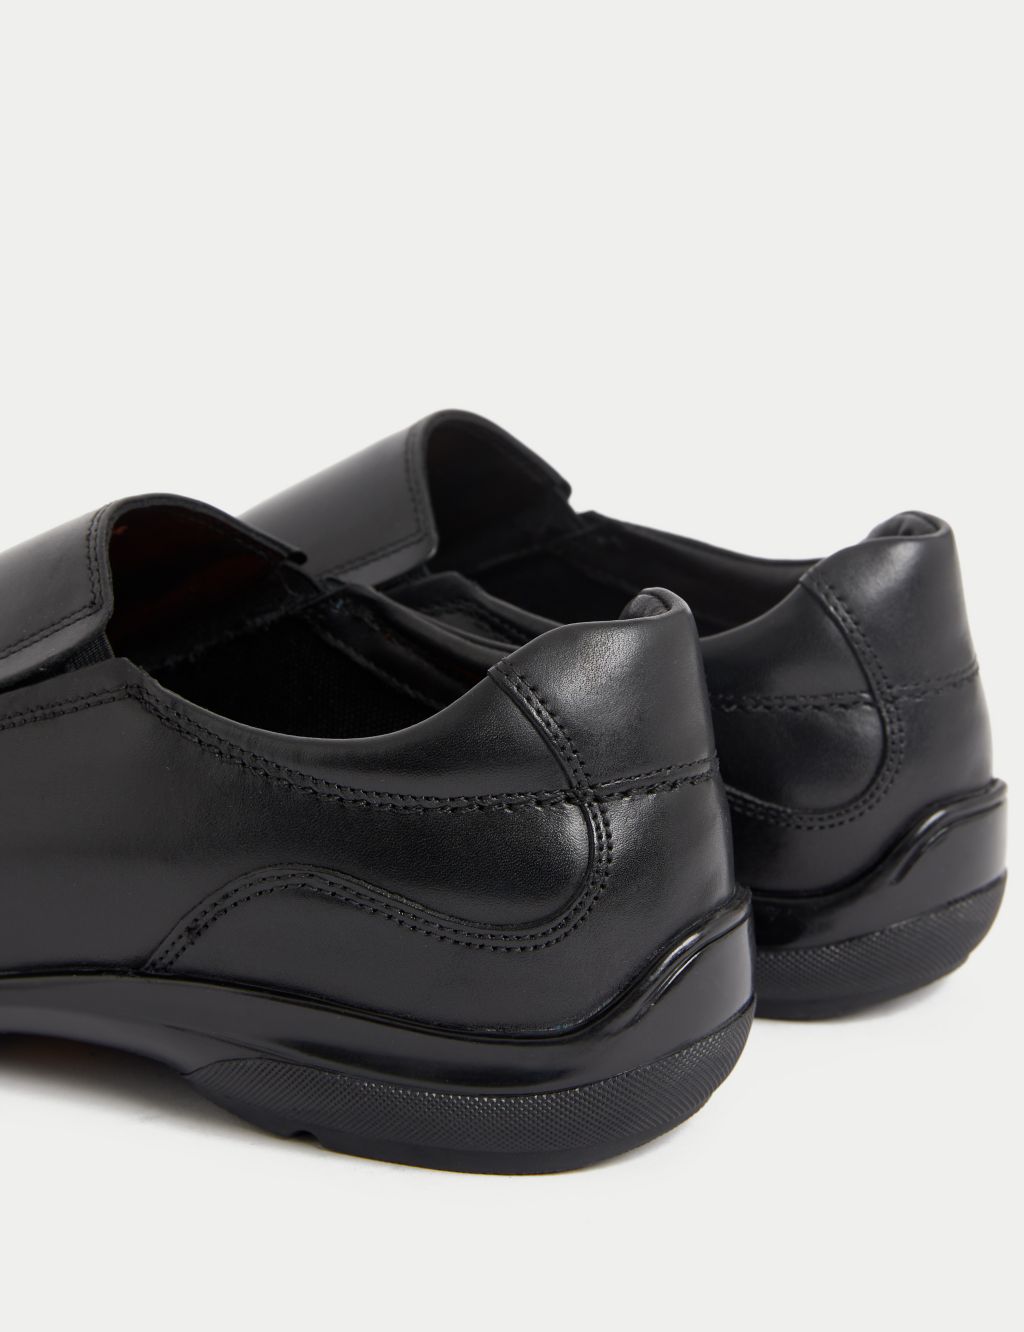 Airflex™ Leather Slip-on Shoes 2 of 4